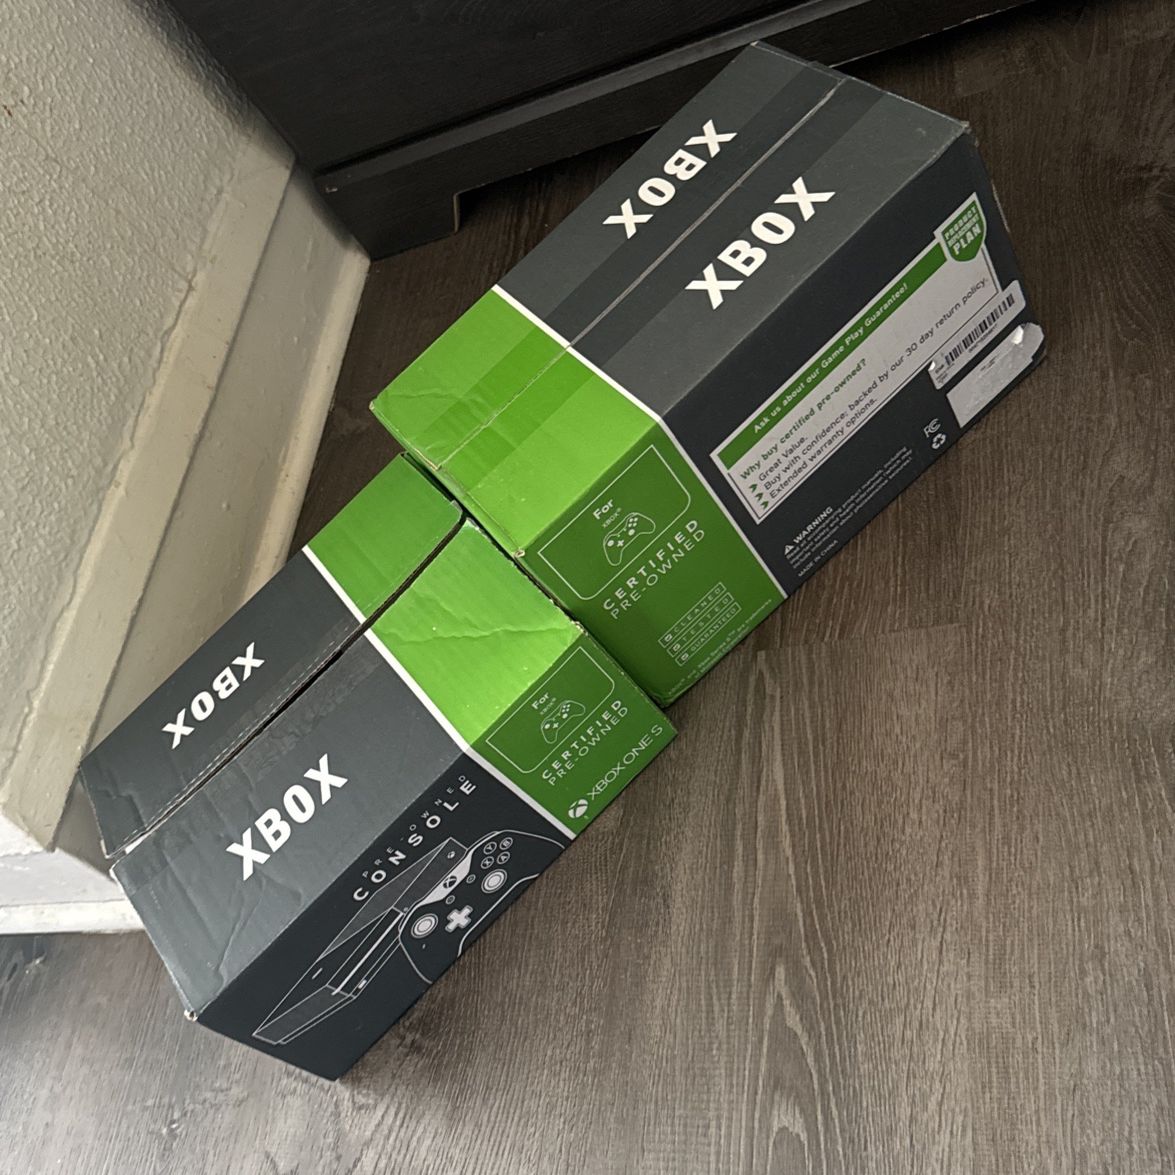 Xbox Series S And One S